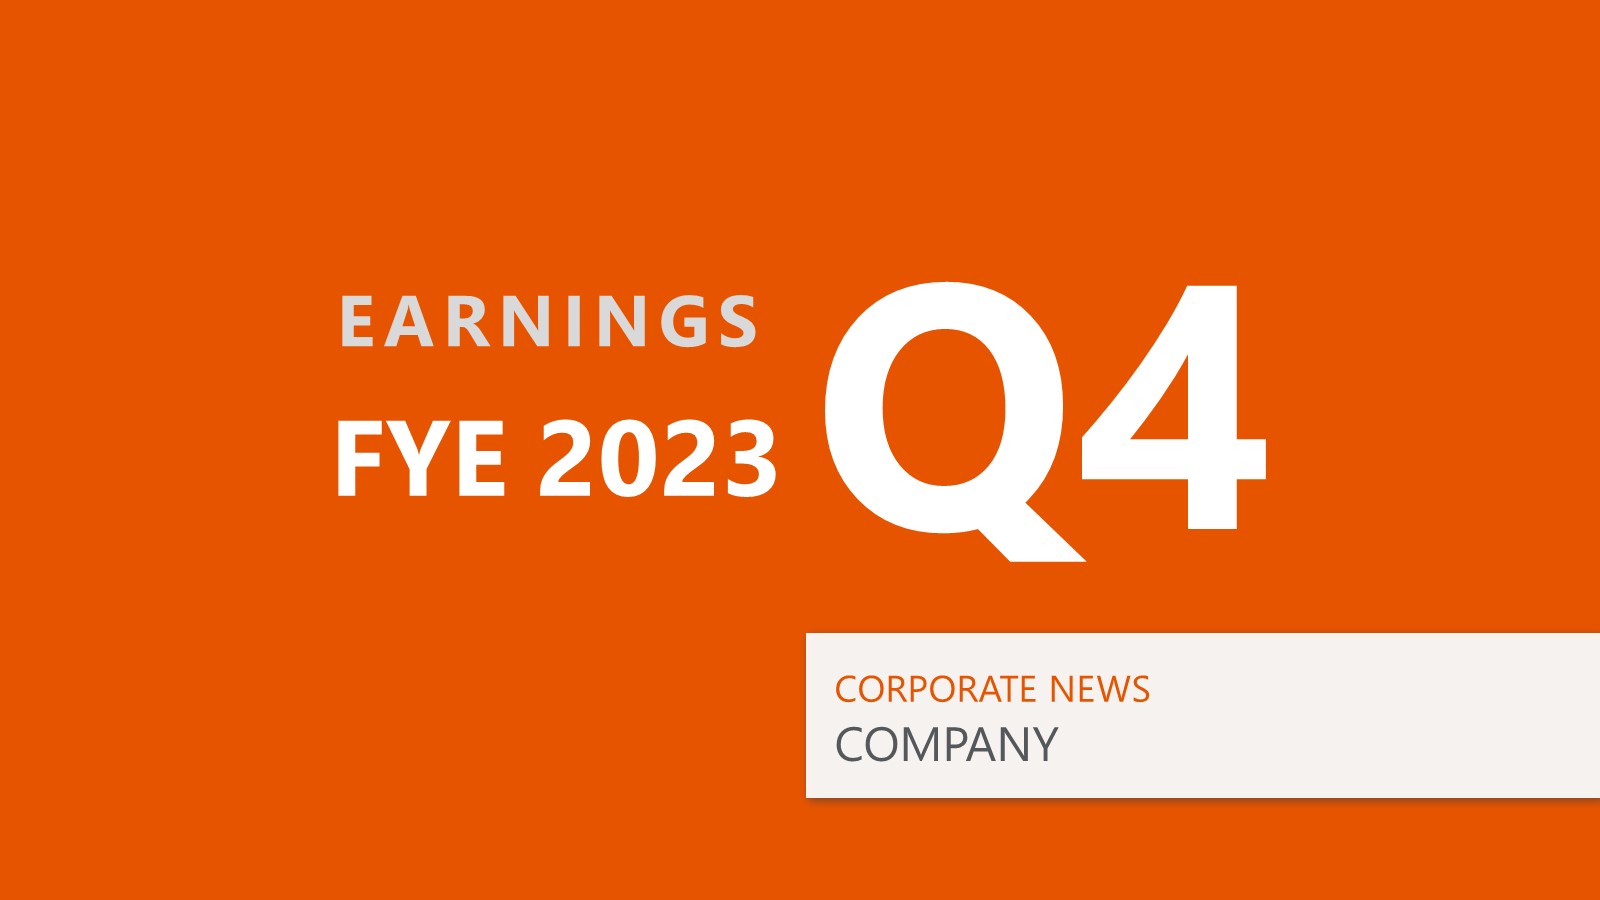 LIXIL Revenue Rises in All Businesses, Profits Fall in FYE2023 サムネイル画像